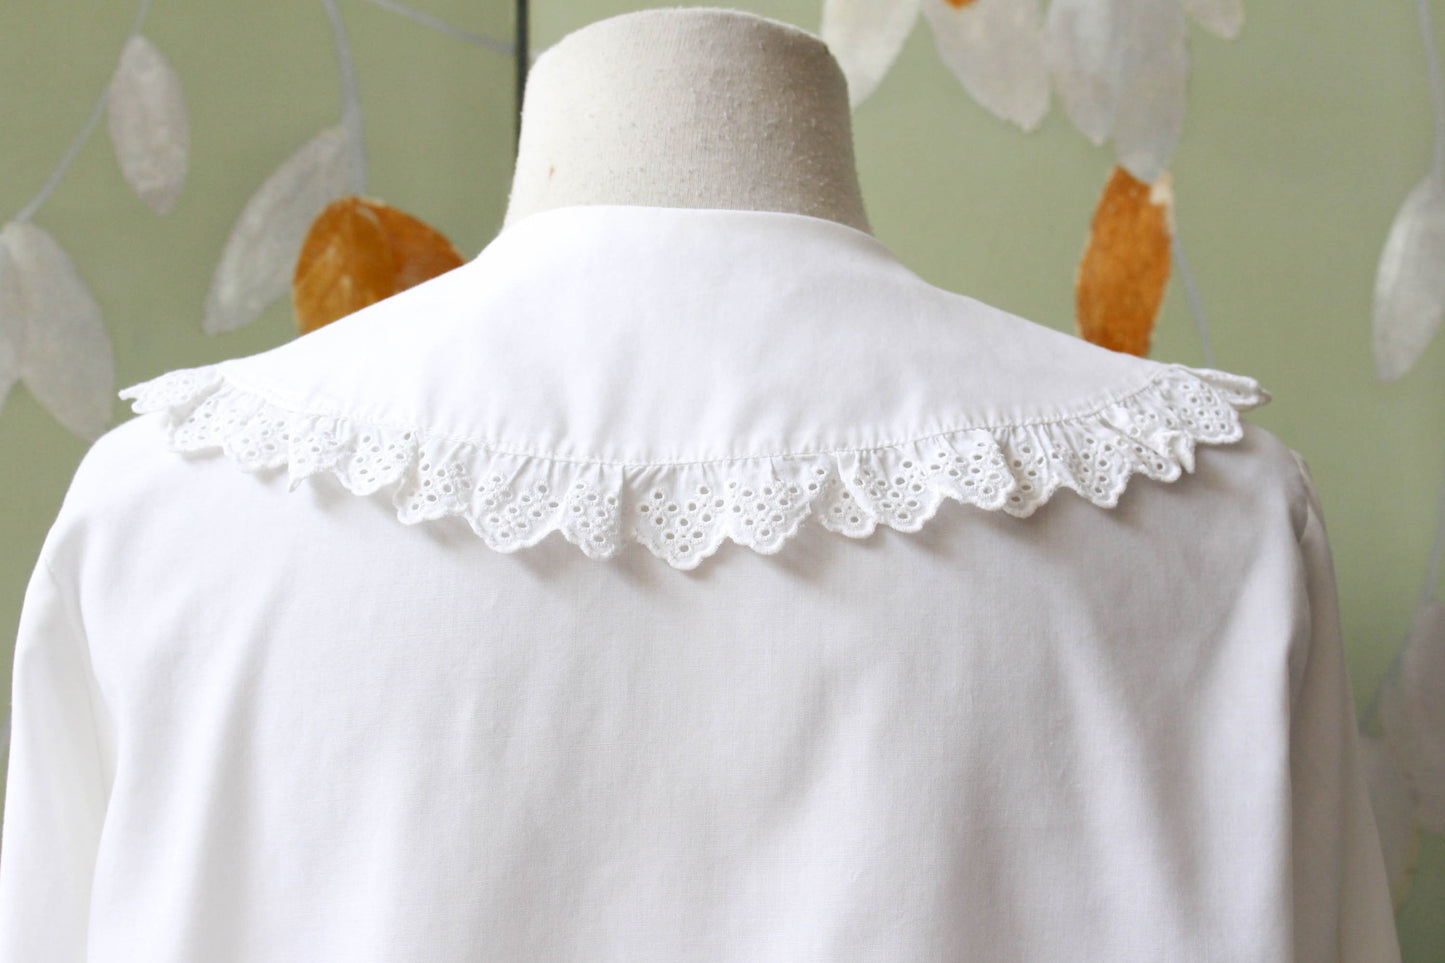 1980s large statement collar blouse with a peter pan rounded collar, trimmed in lace. white crisp cotton vintage blouse 